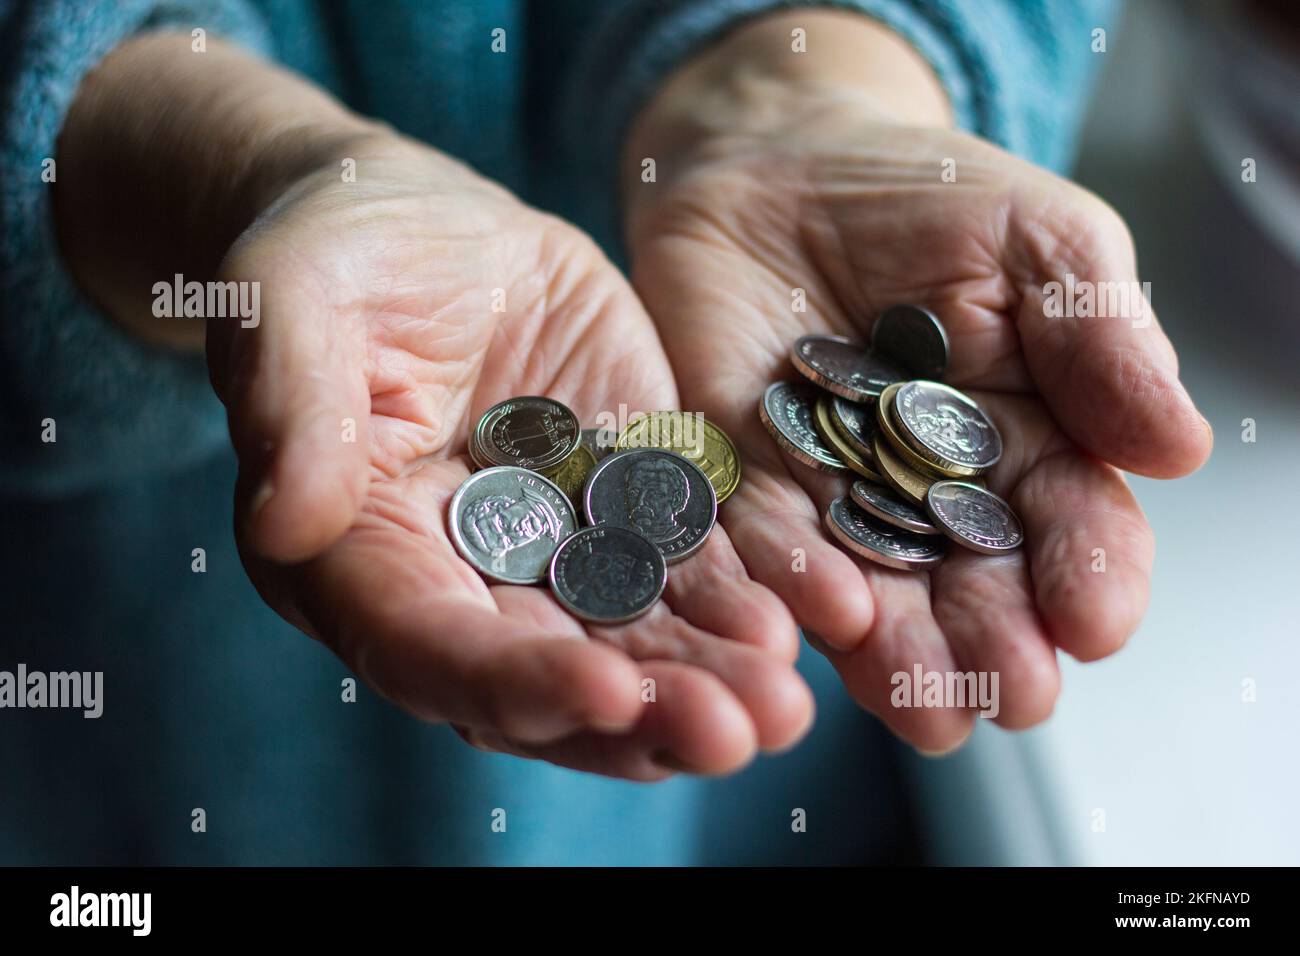 Grandma's wrinkled hands hold change in poverty Stock Photo